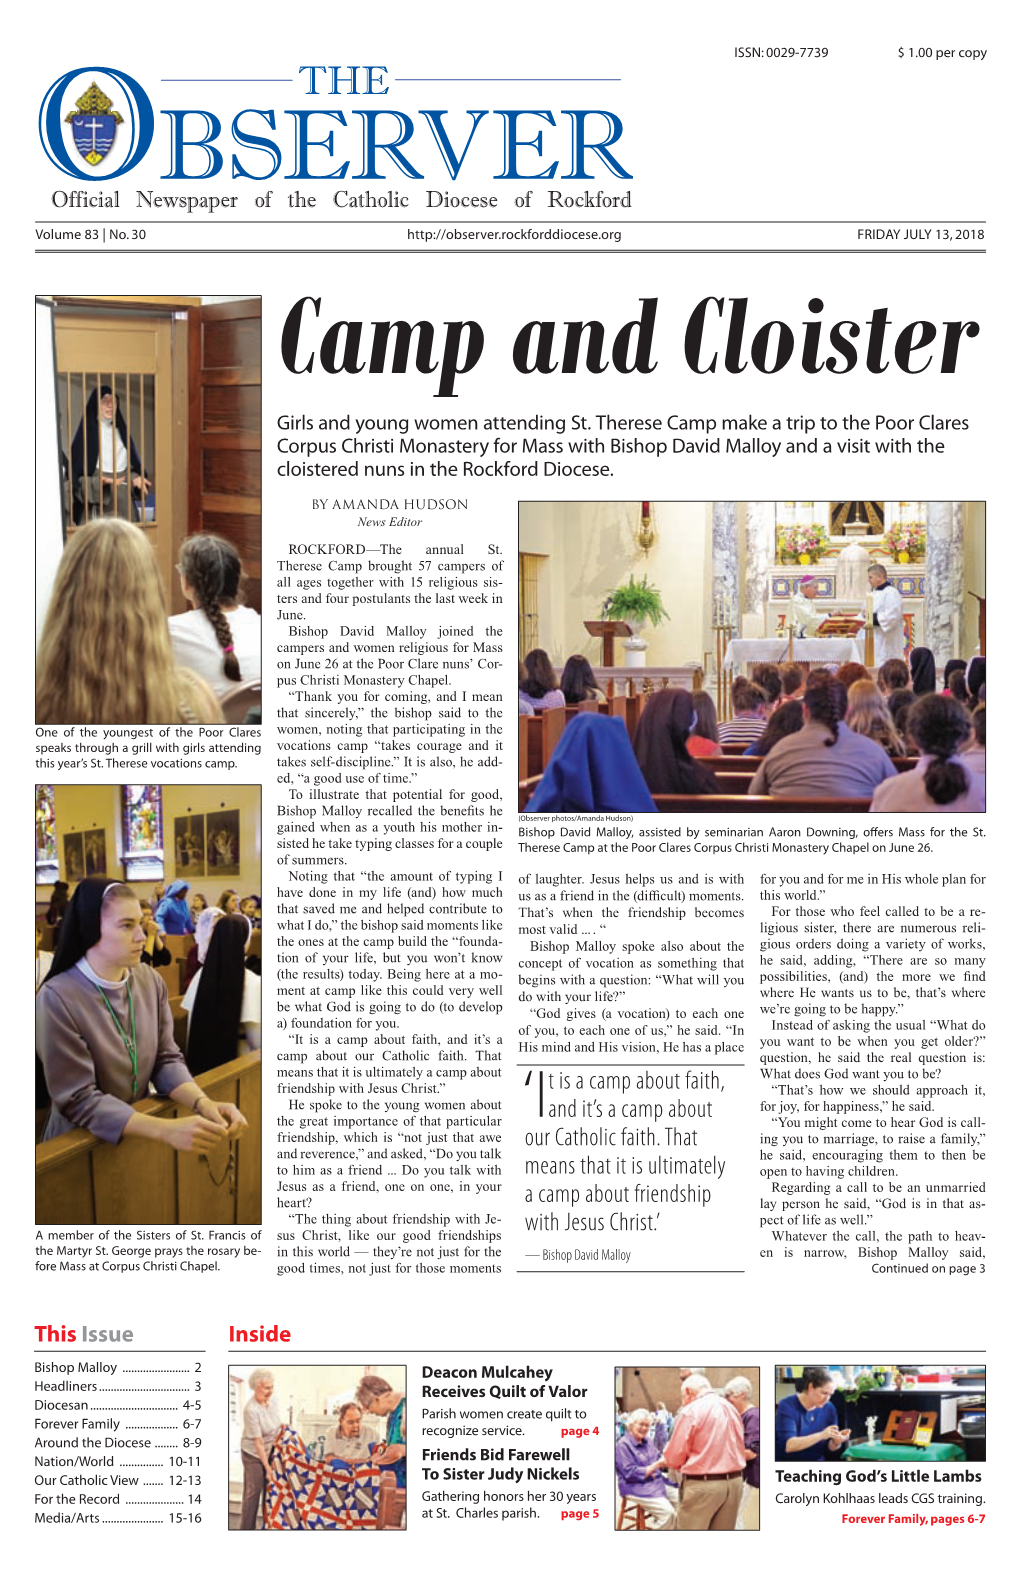 'It Is a Camp About Faith, and It's a Camp About Our Catholic Faith. That